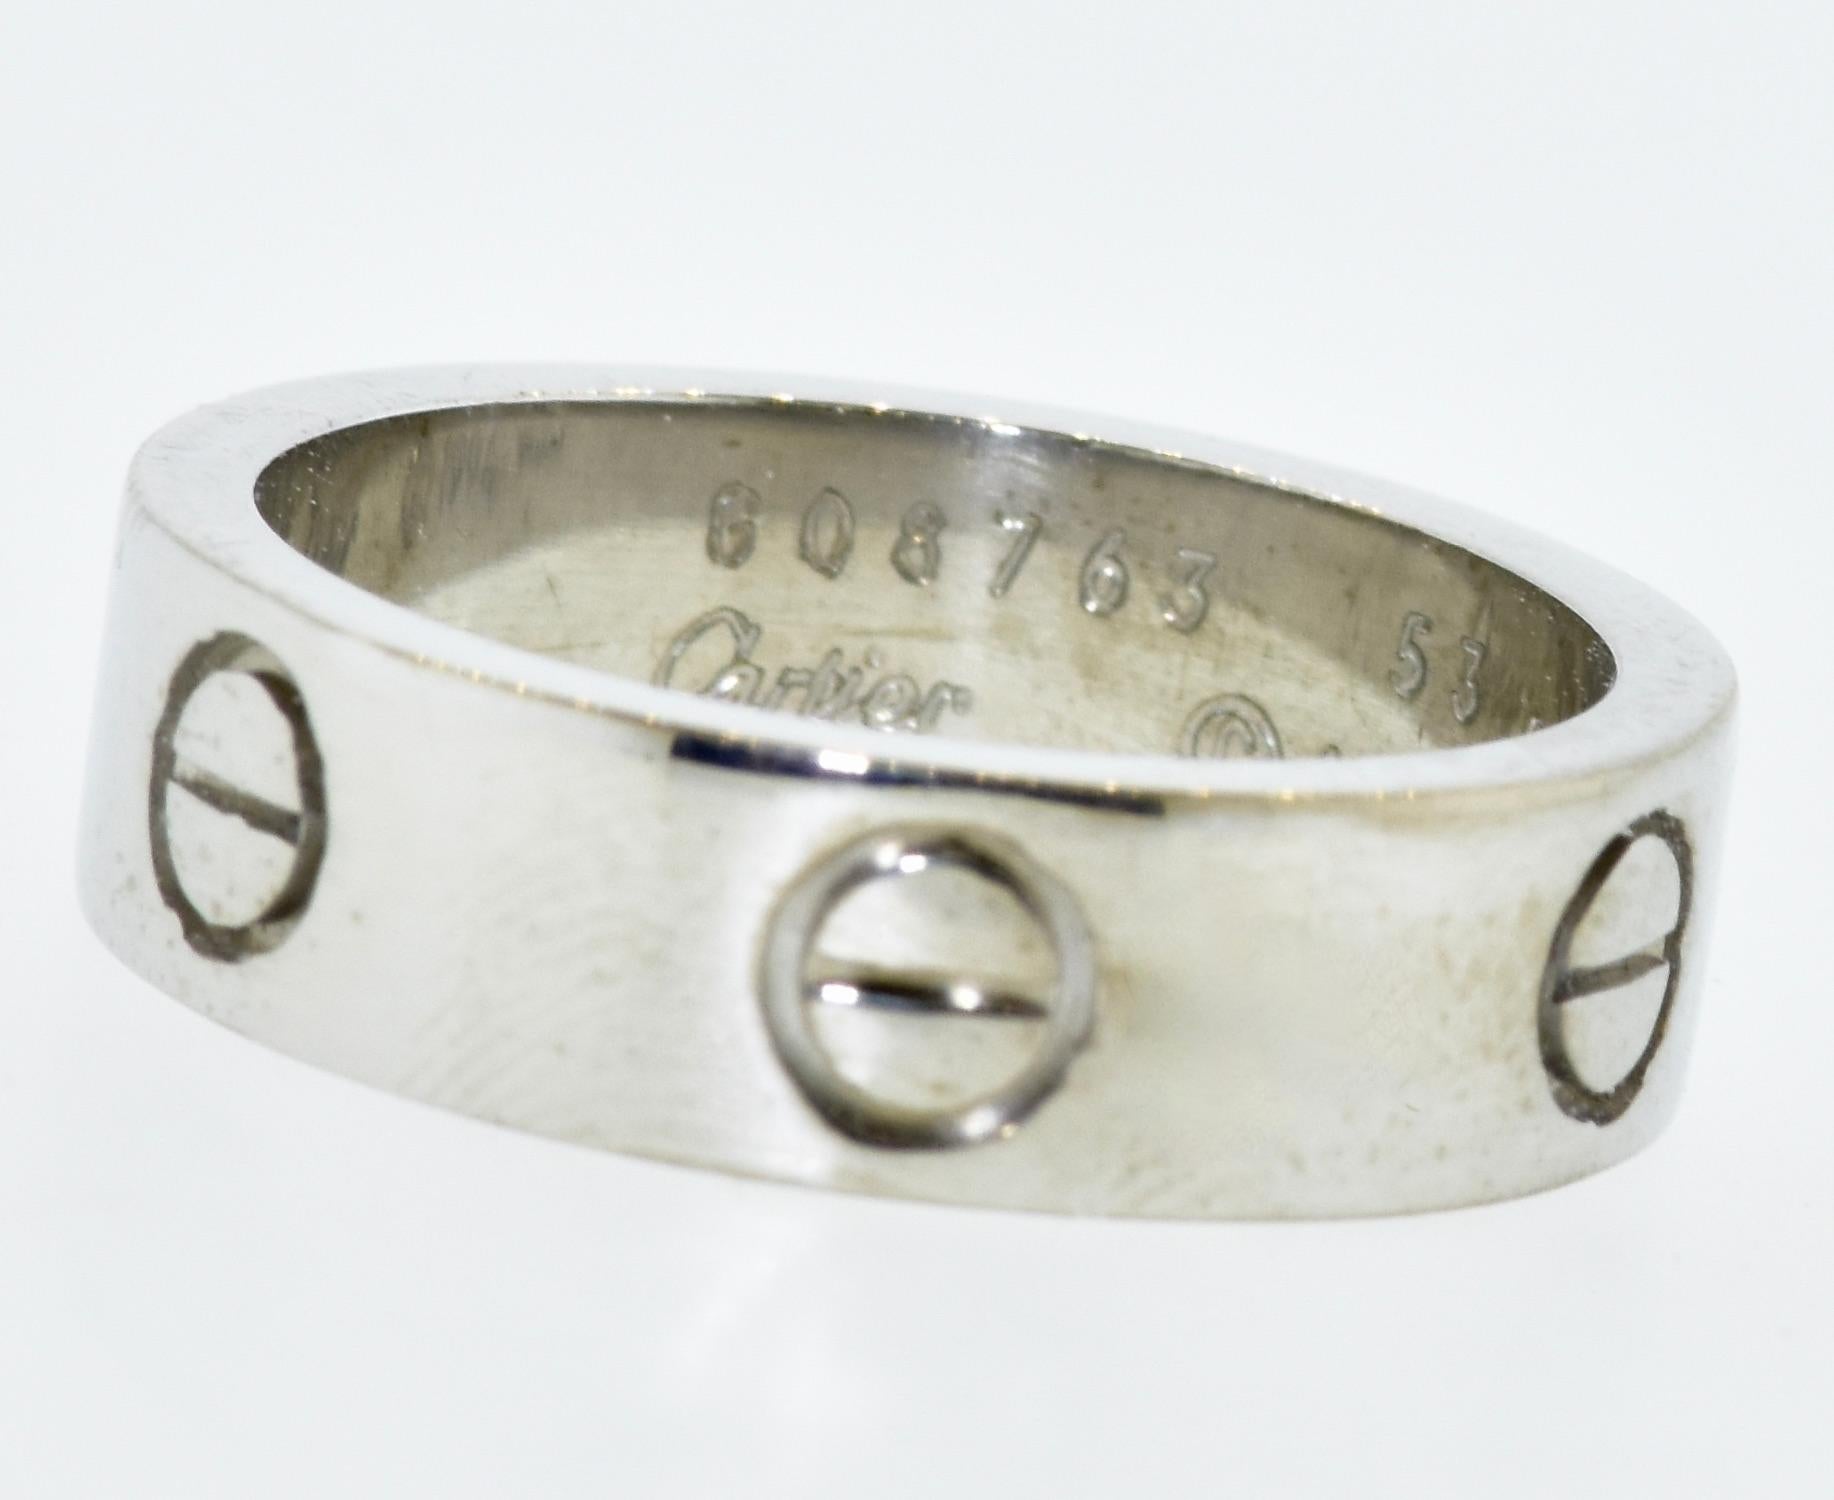 Cartier LOVE band ring in 18K white gold.  In excellent condition, this band is signed, numbered, dated, 1996, the European size, and 750 for 18K white gold.  This band is a size 6.5 American, (this ring would be very difficult to resize), and